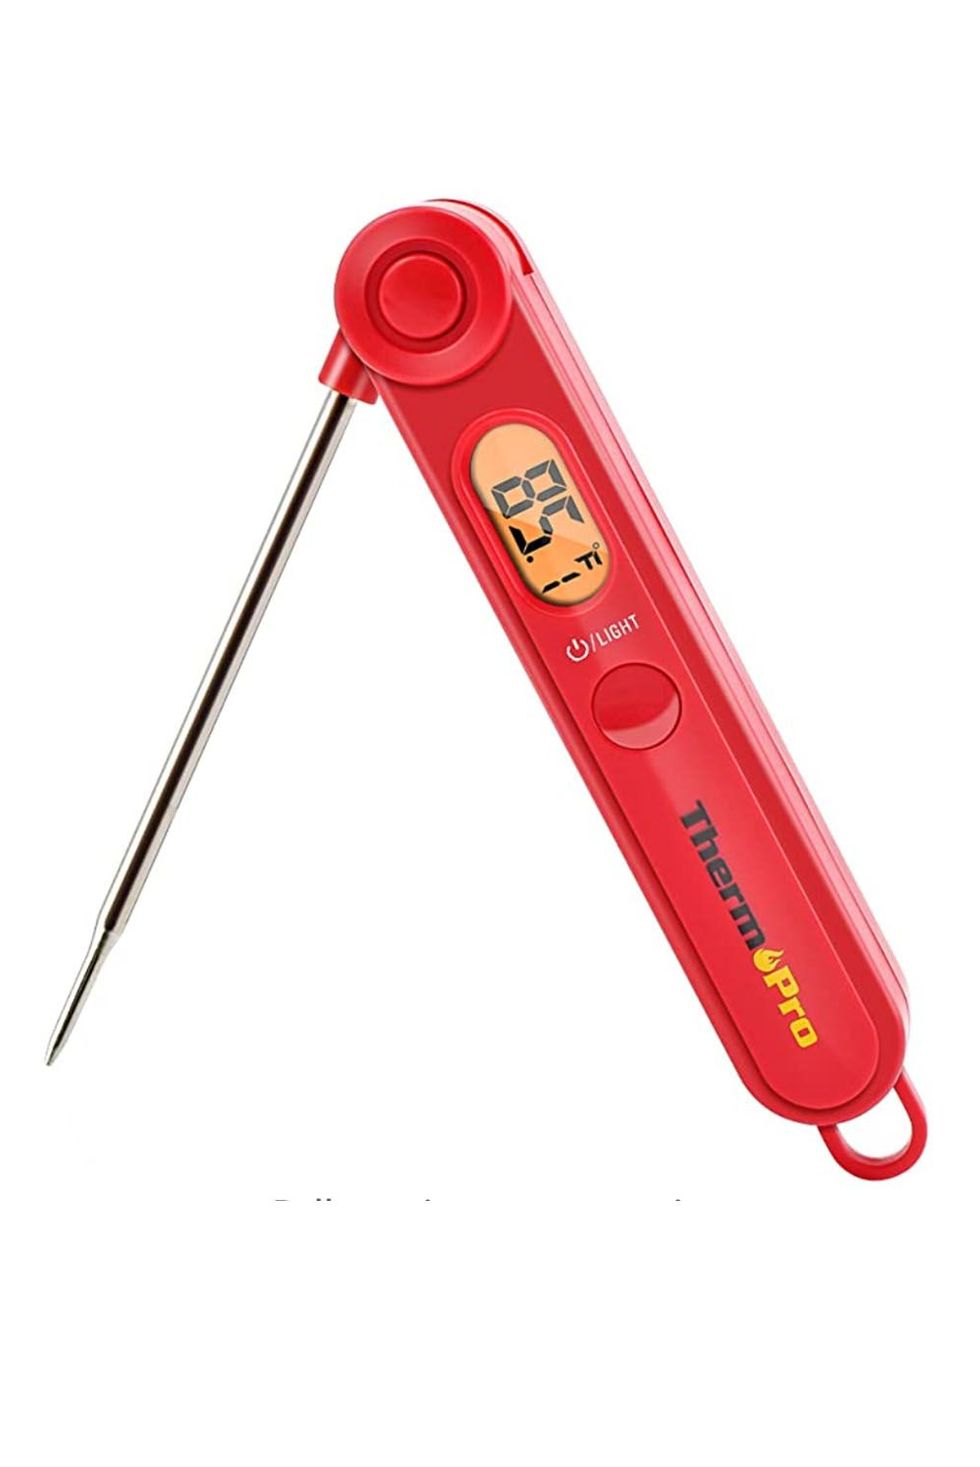 8 Best Meat Thermometers in 2022 - How to Use Meat Thermometer